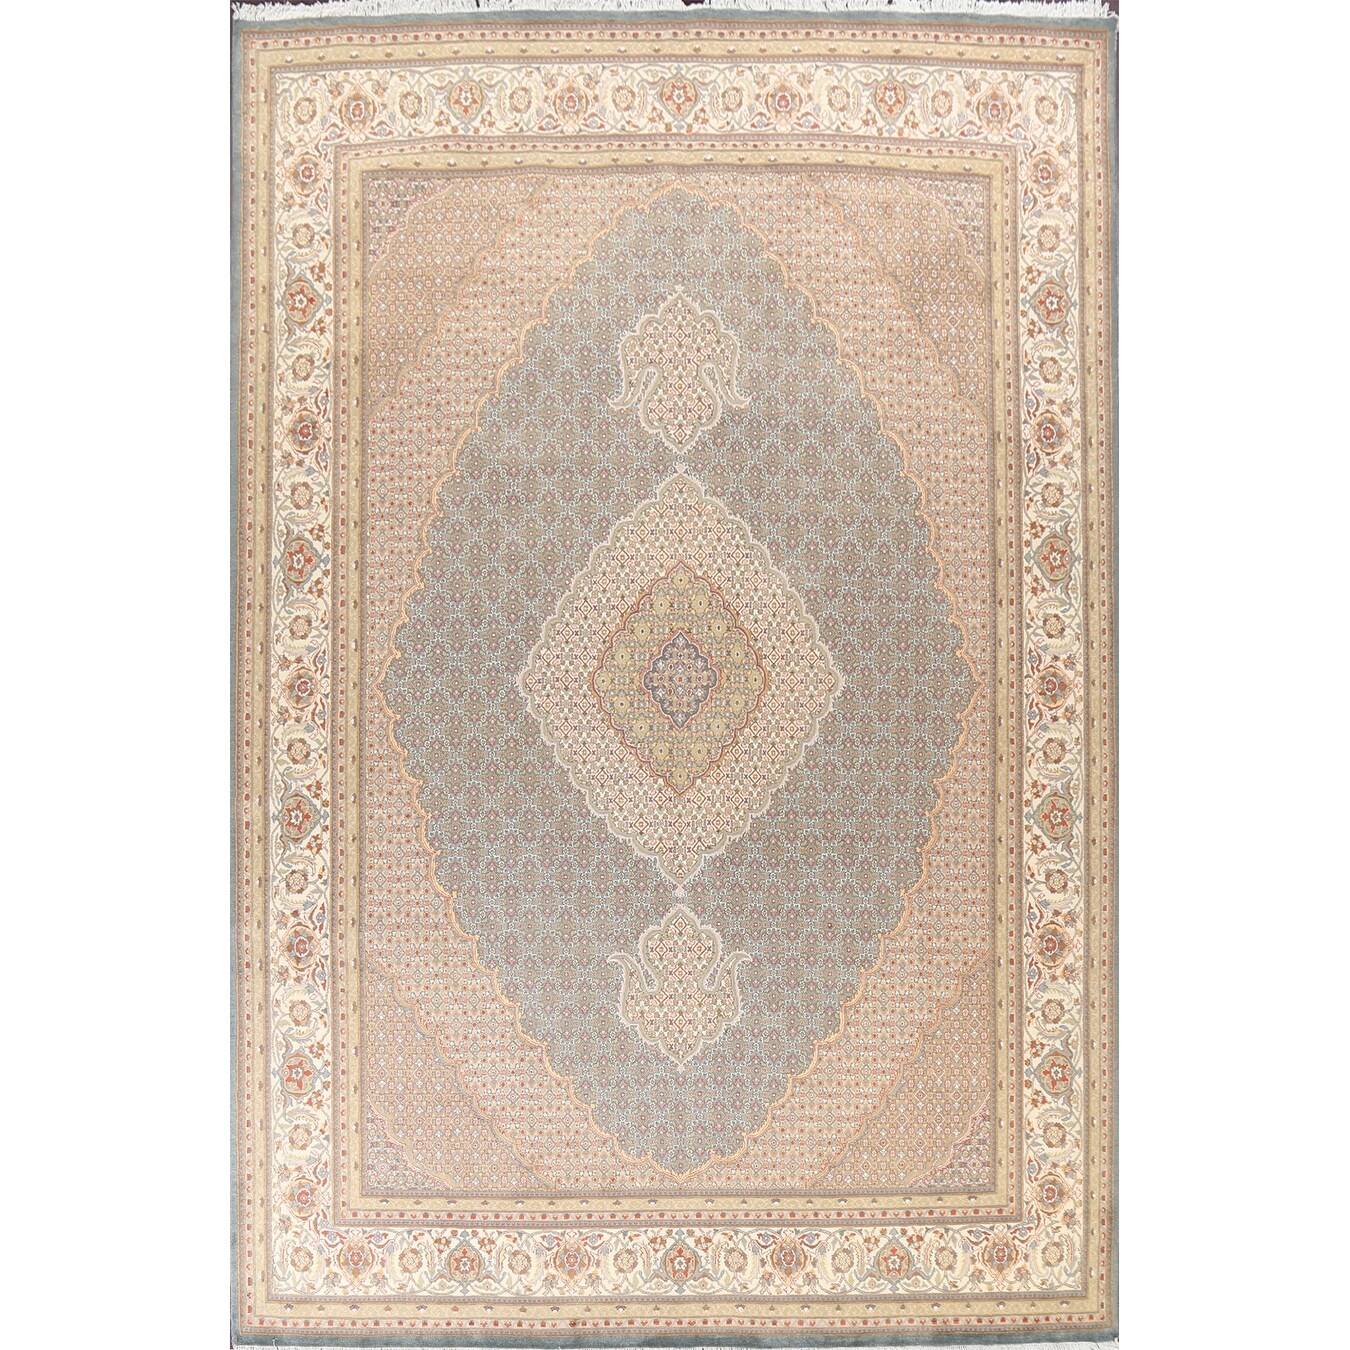 Brown EORC Area Rugs 3'10' x 5'9 